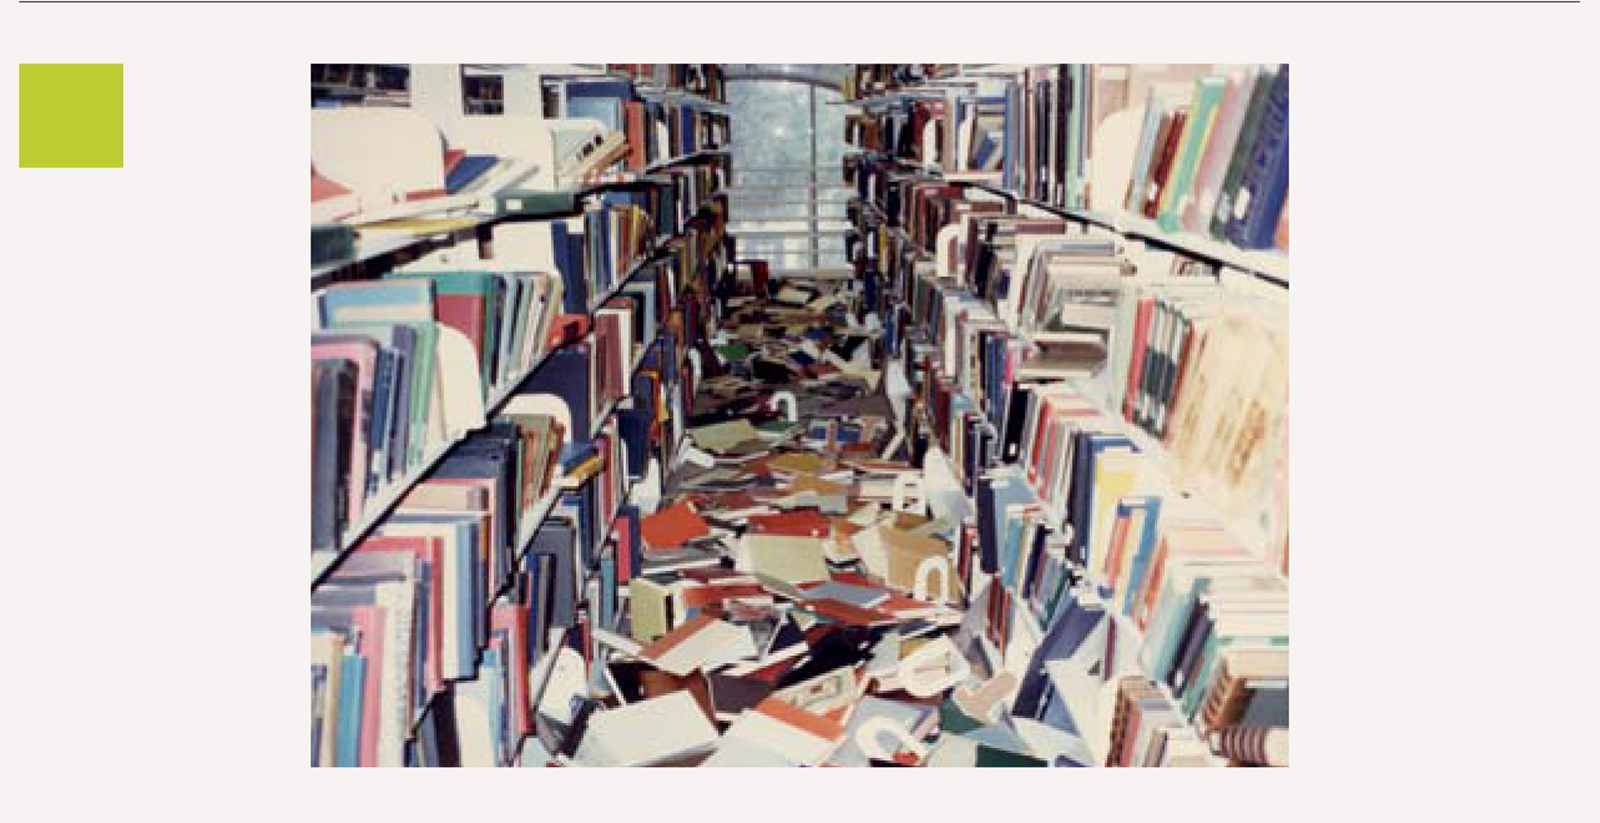 A photograph of toppled books at the Claremont Colleges Library, California, in the aftermath of an earthquake on 28 February 1990. 